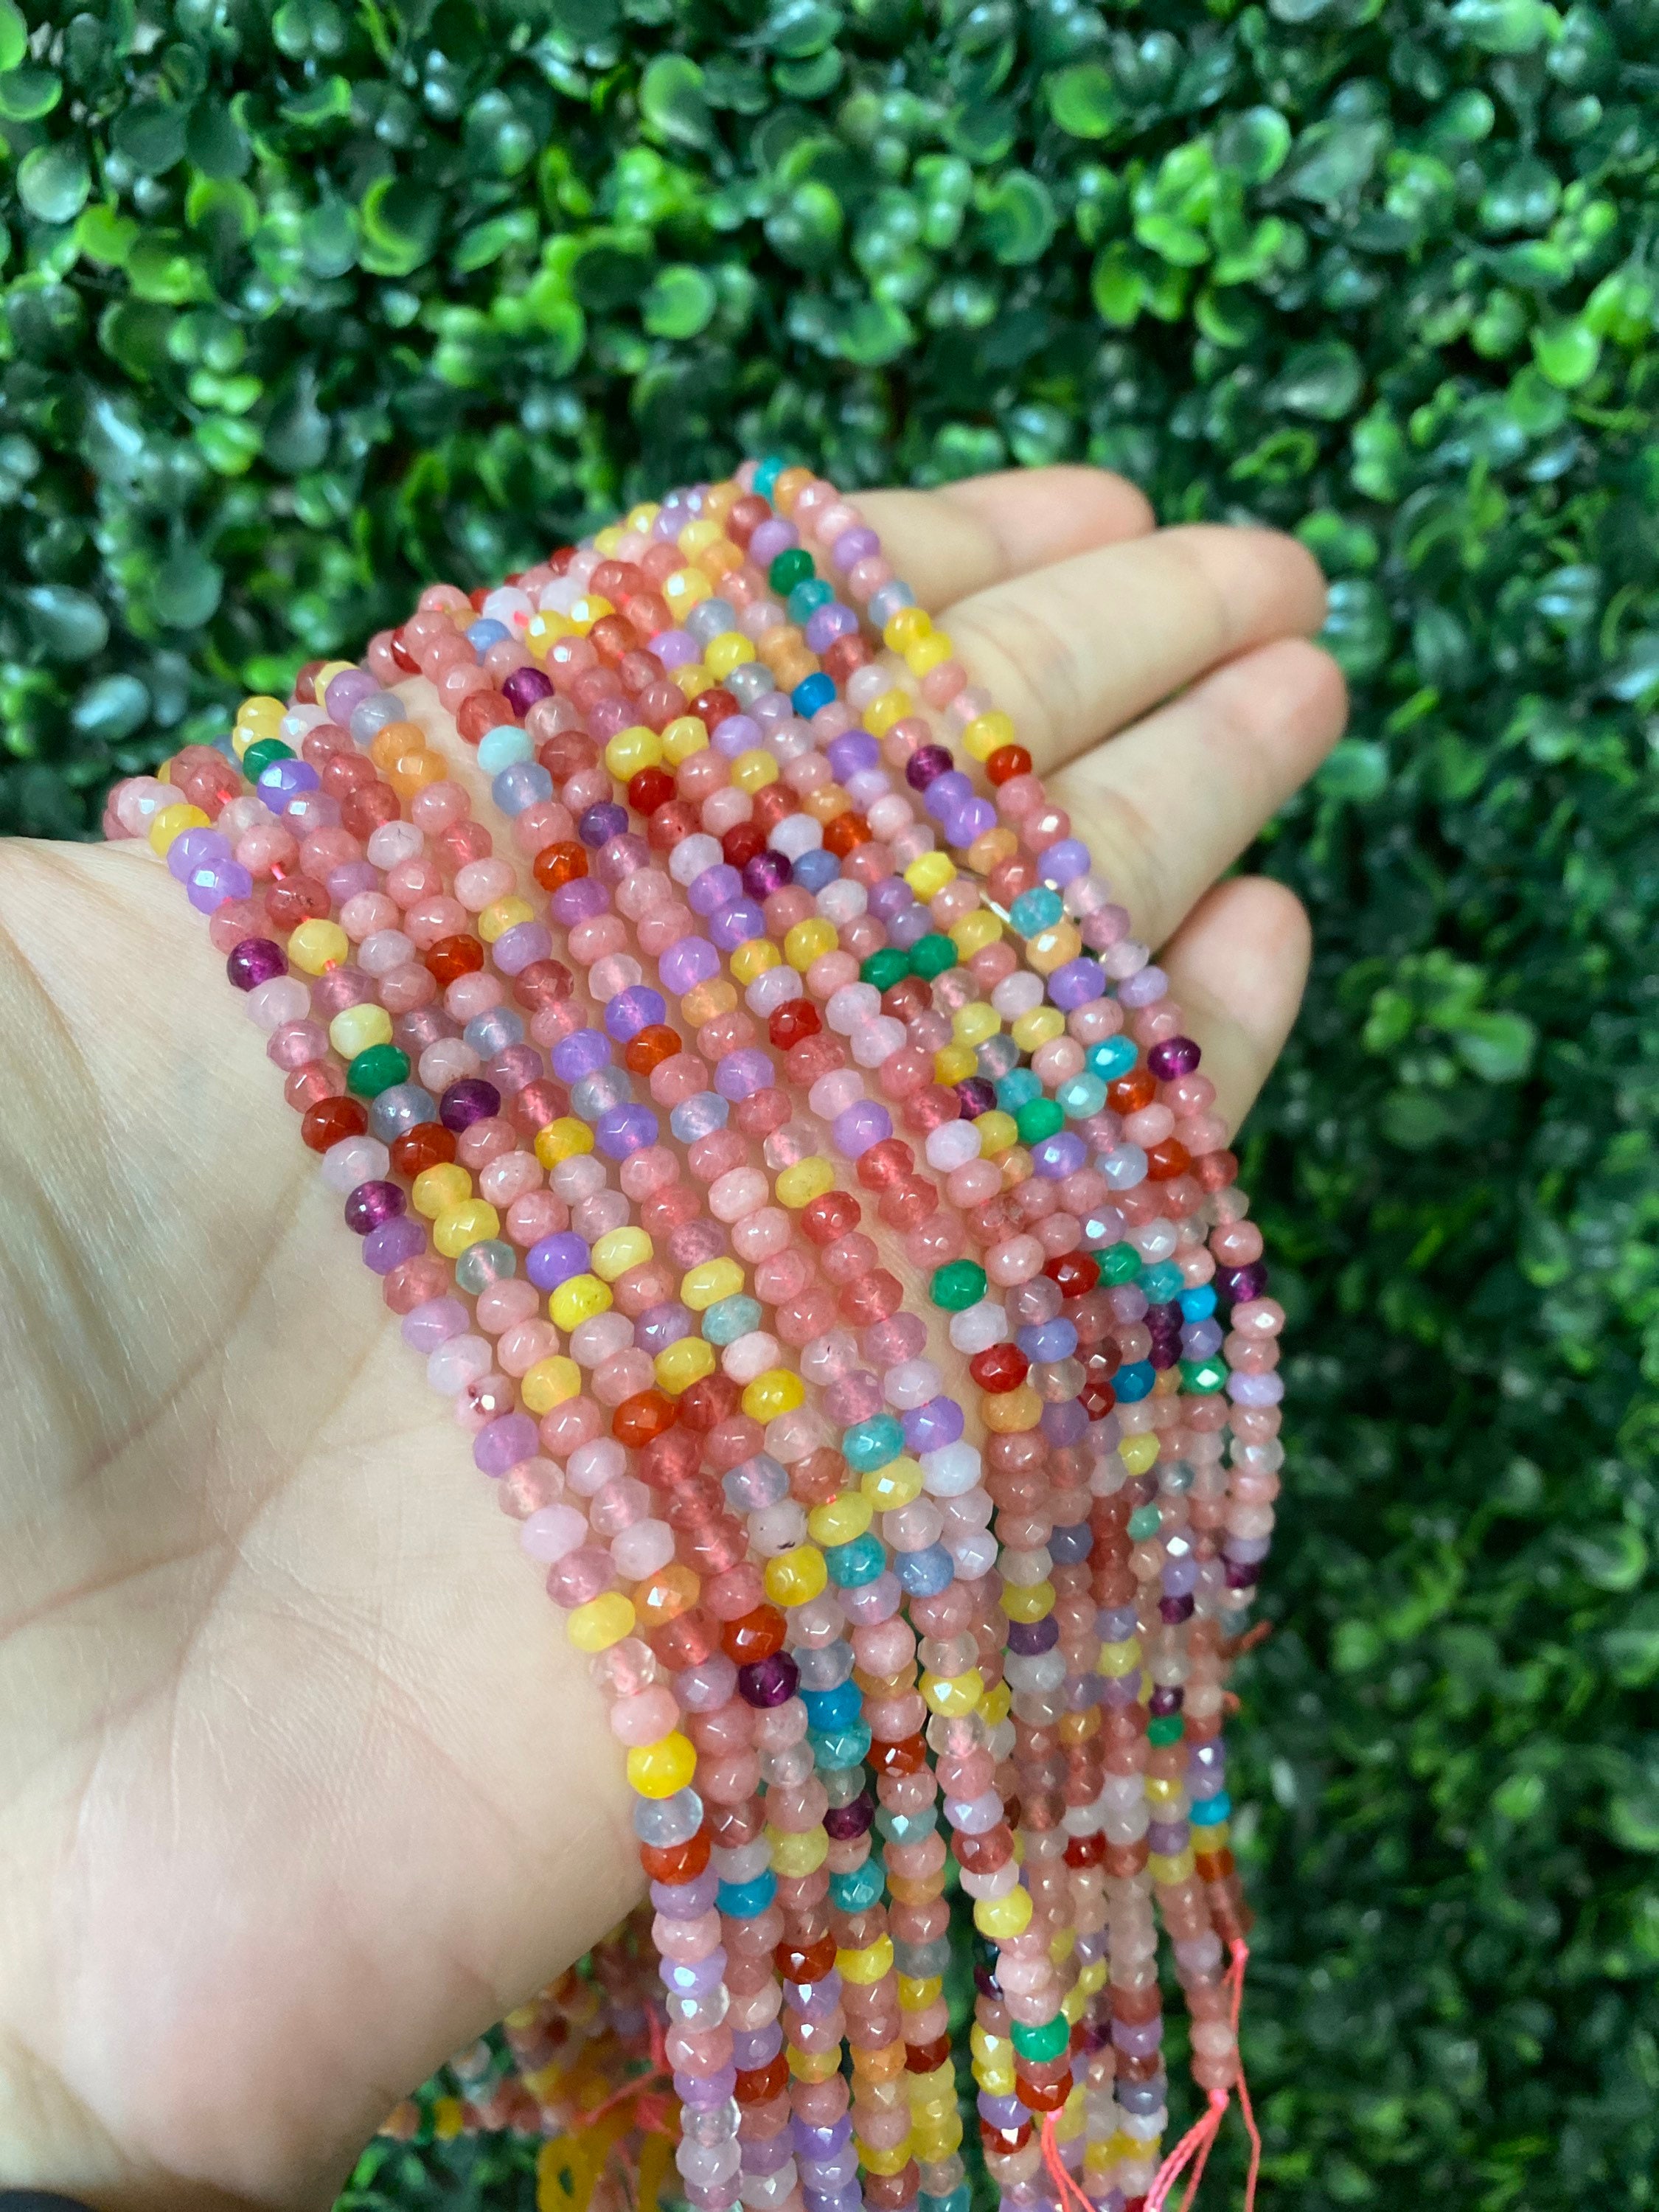 DIY Seed Bead Kit for Kids Arts & Crafts,bracelets,mask Chain,tiny Colorful  Waist Bead Box Kit,beads for Mask Chains,jewelry Making for Kids 